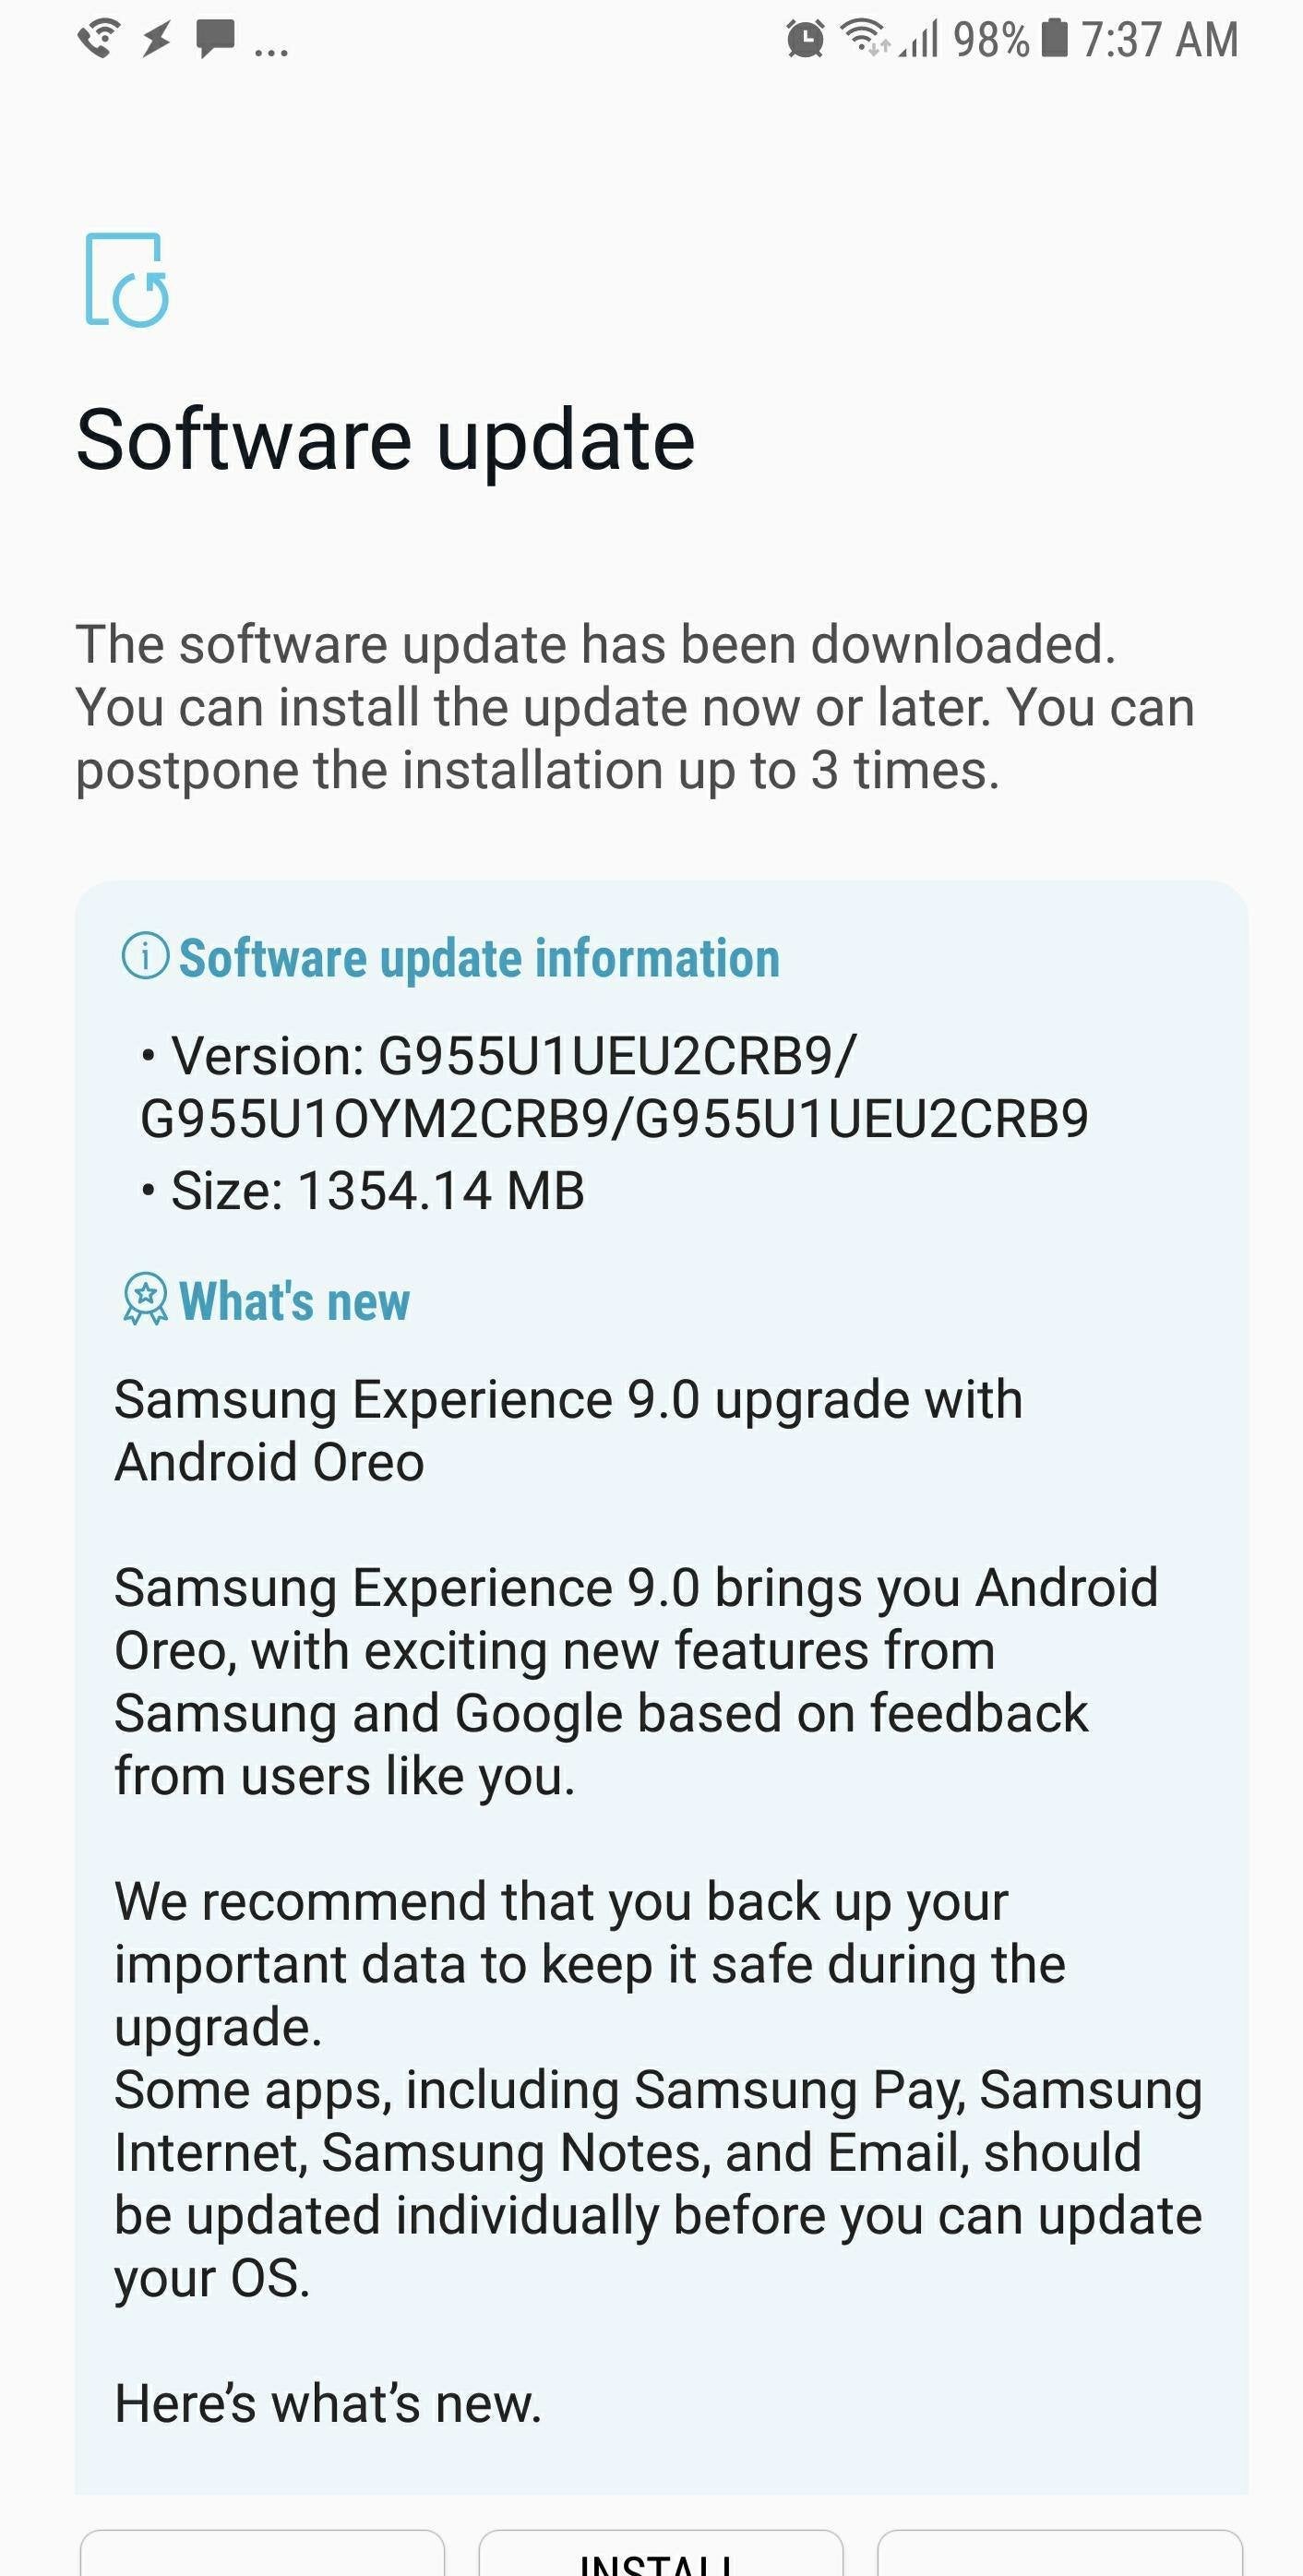 Unlocked Samsung Galaxy S8 and S8+ finally getting Android 8.0 Oreo in the US